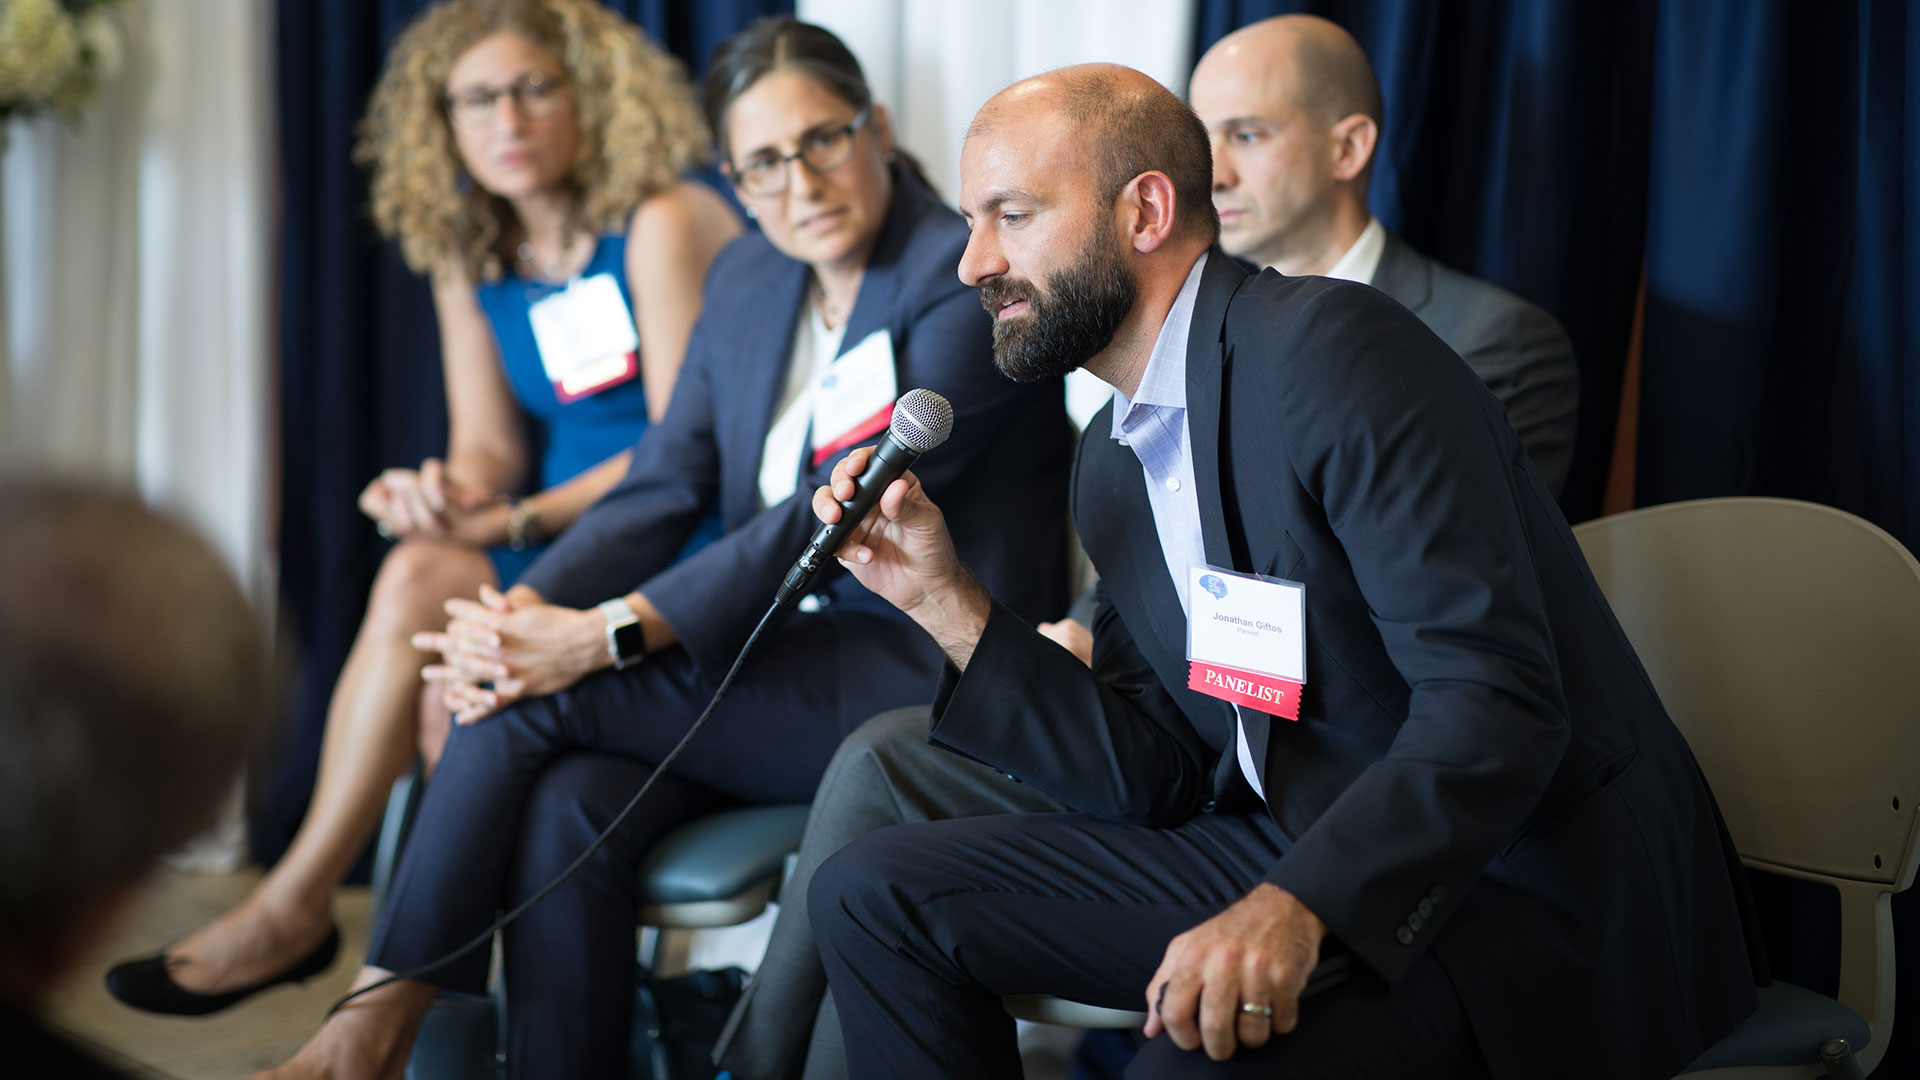 Einstein and Montefiore Host Day-Long Conference on  Opioid Use Disorder and Treatment